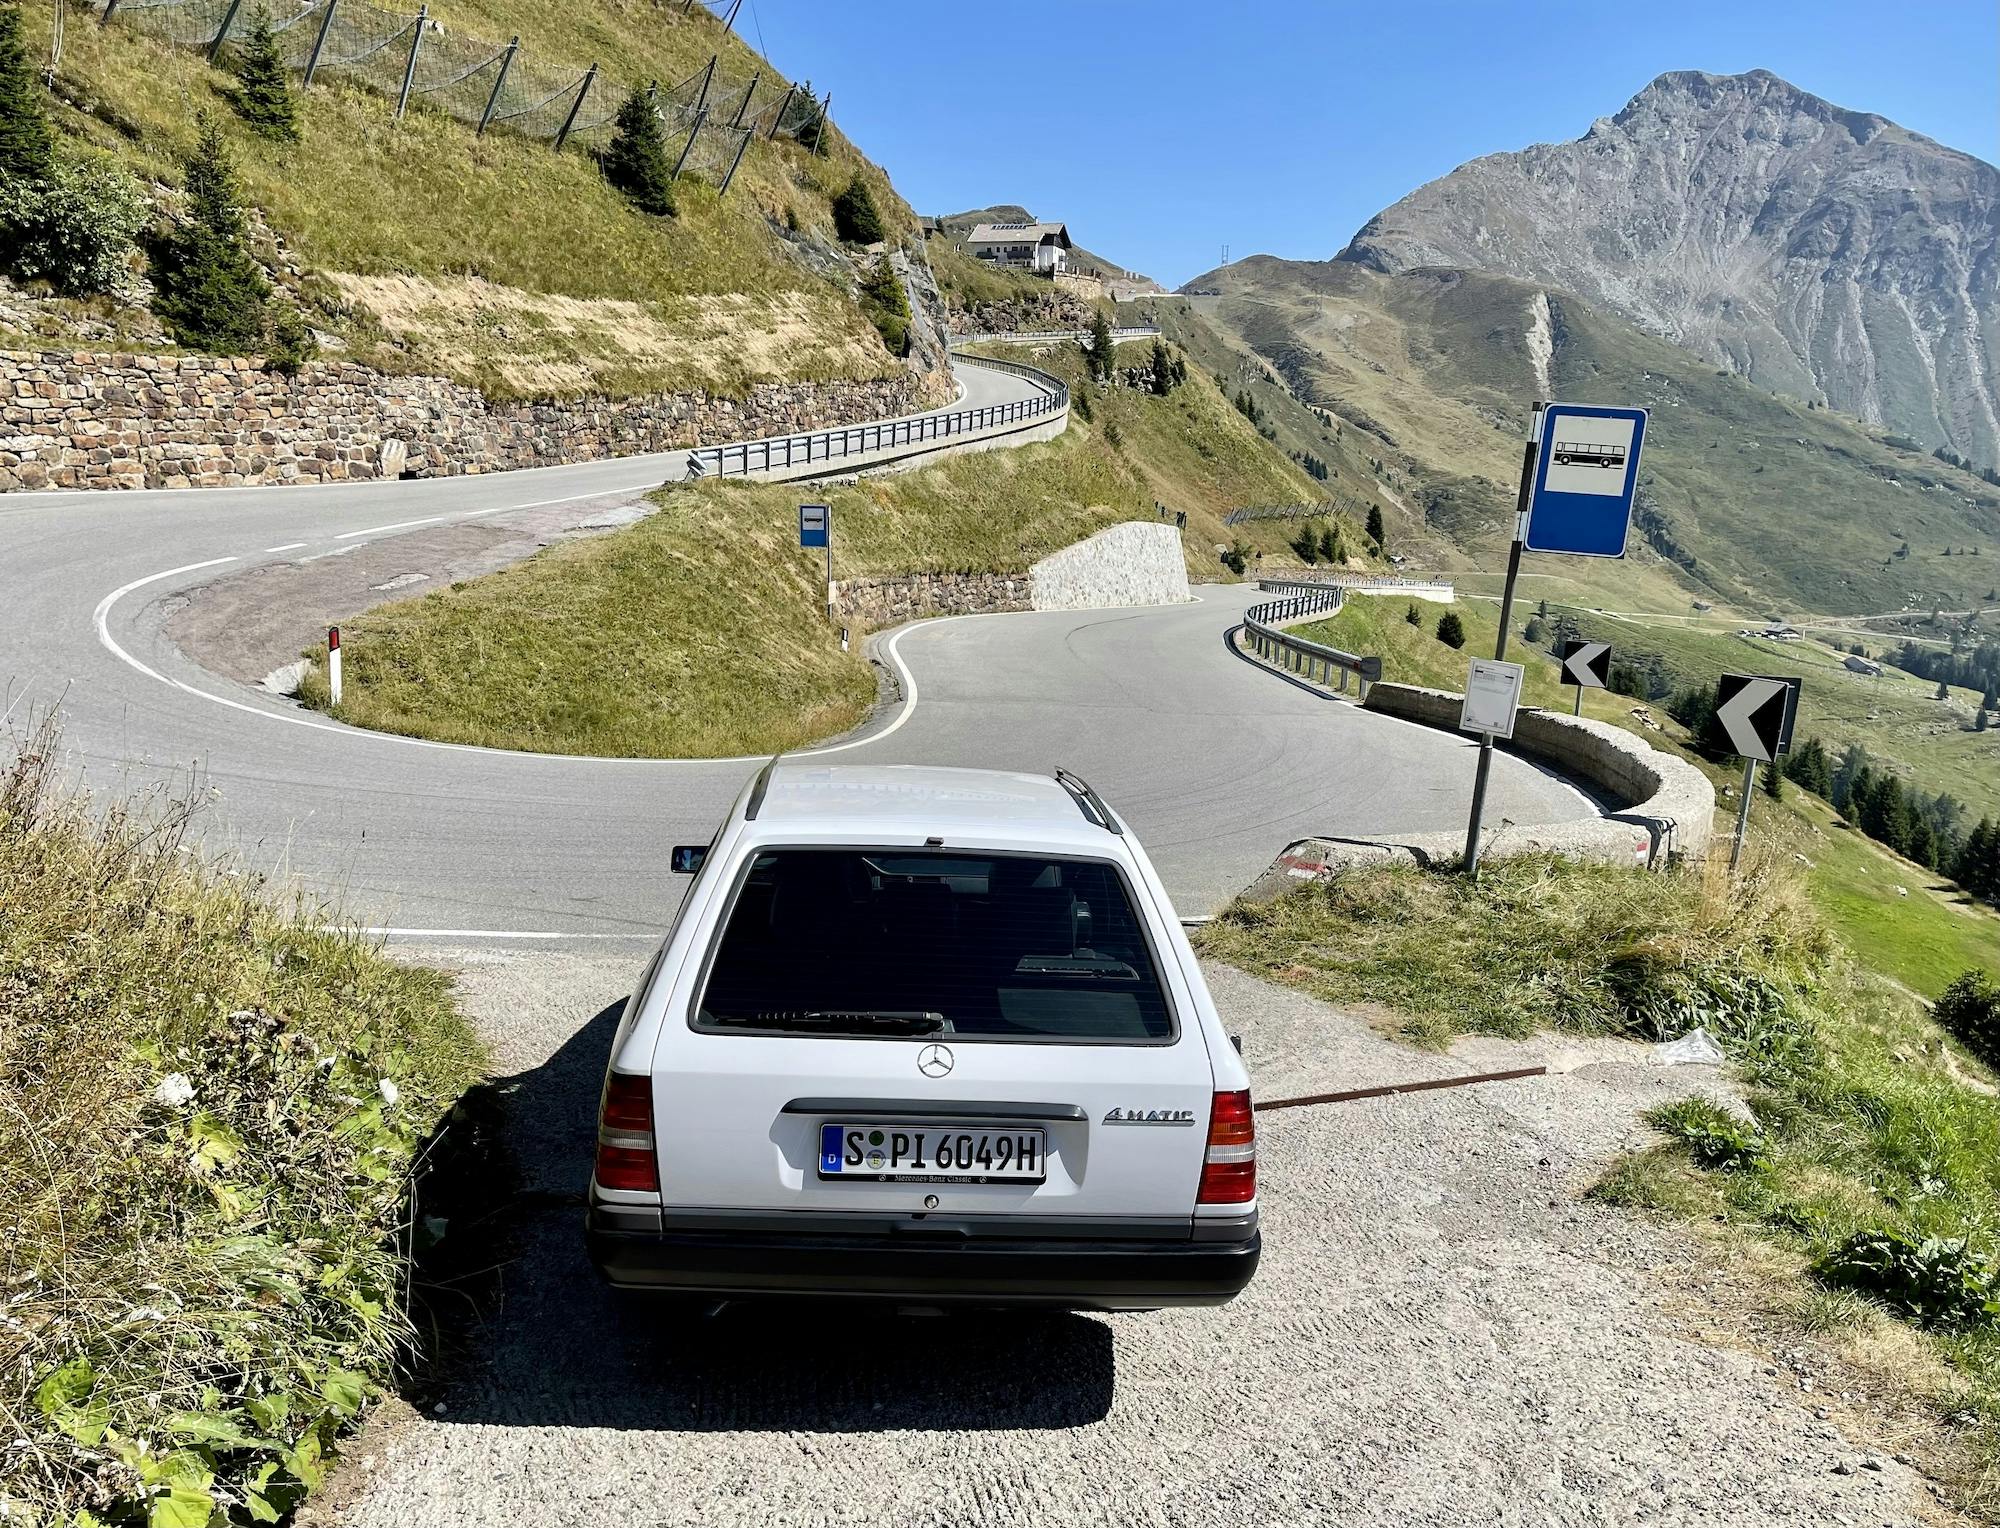 Mercedes-Benz W124: The Engineer's E-Class takes on the Alps